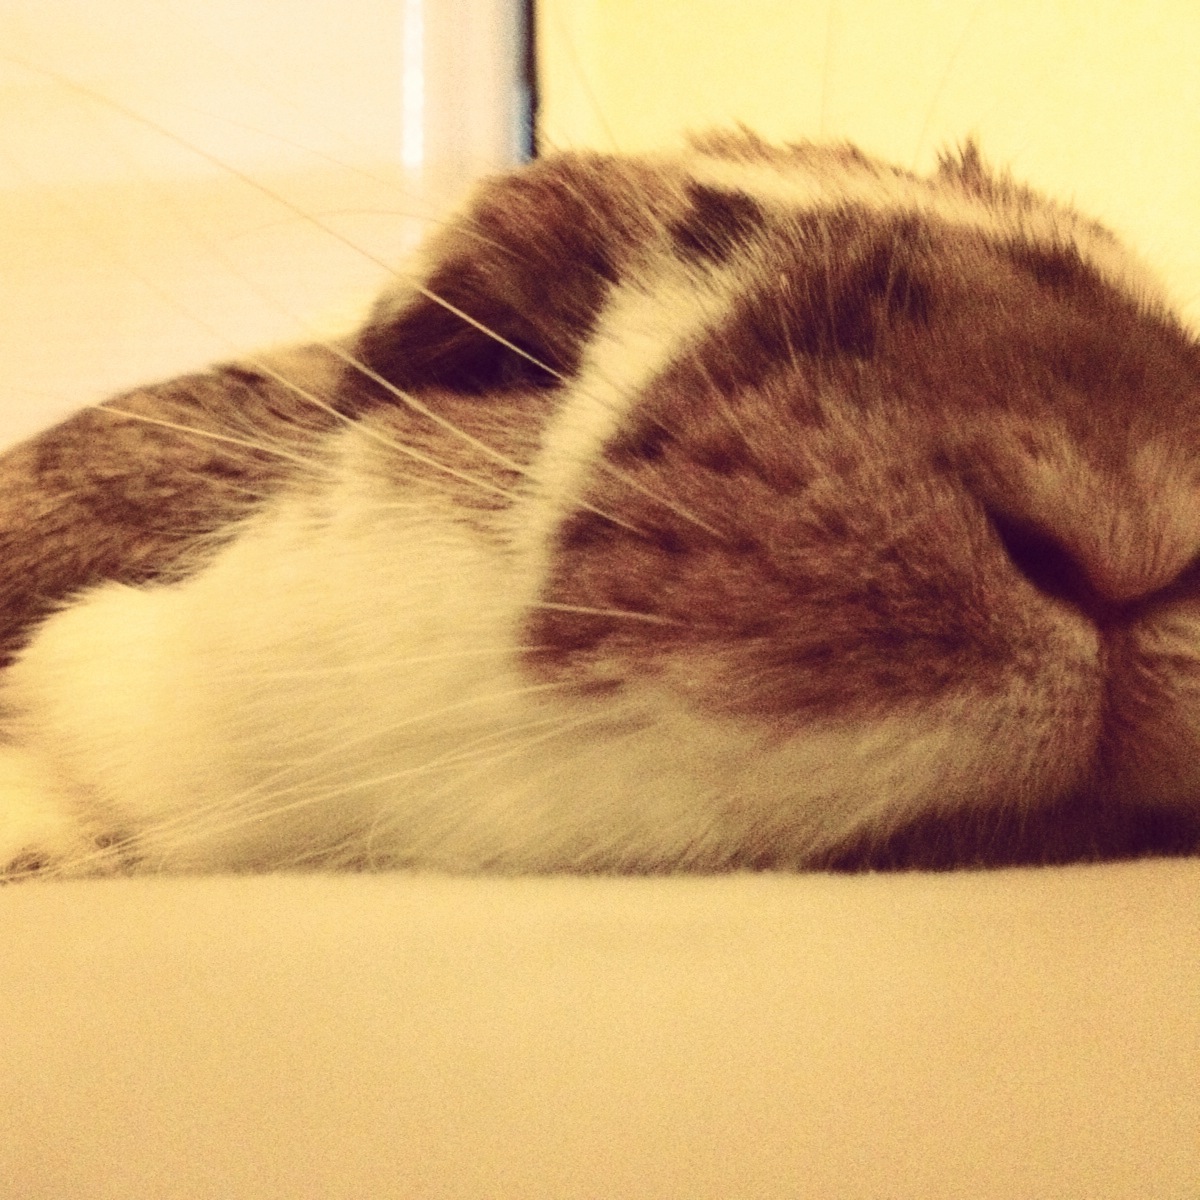 Bunny Has Achieved Ultimate Melted Status